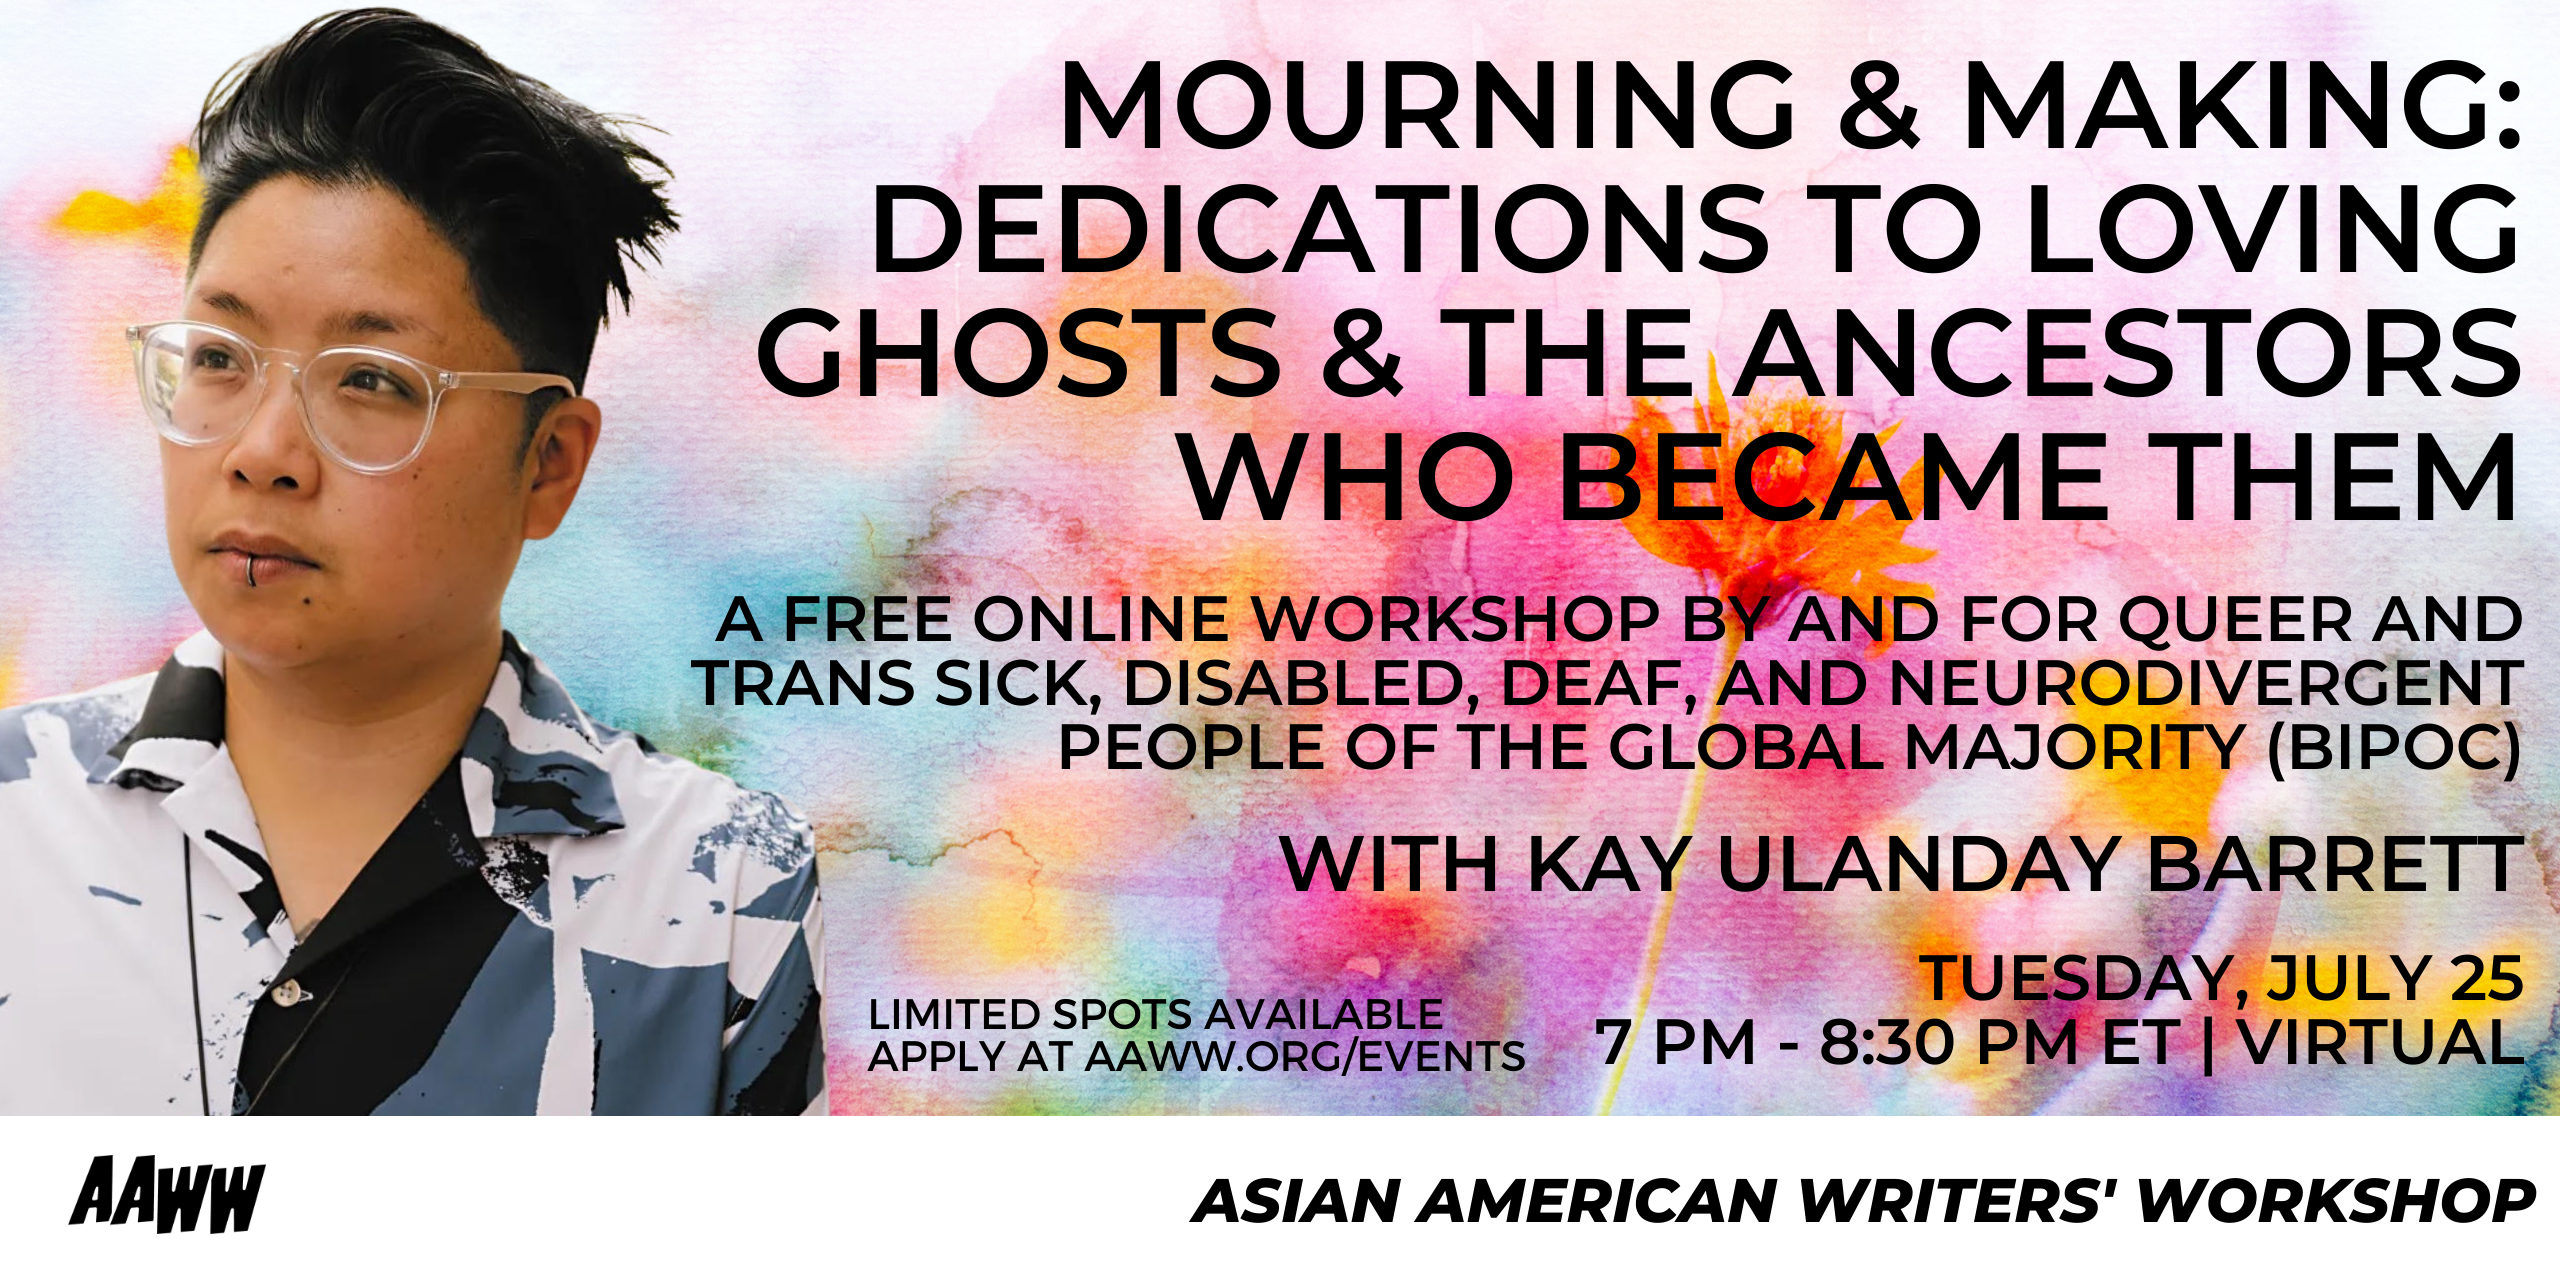 [VIRTUAL WORKSHOP] AAWW and The Poetry Coalition Present: Mourning & Making: dedications to loving ghosts & the ancestors who became them